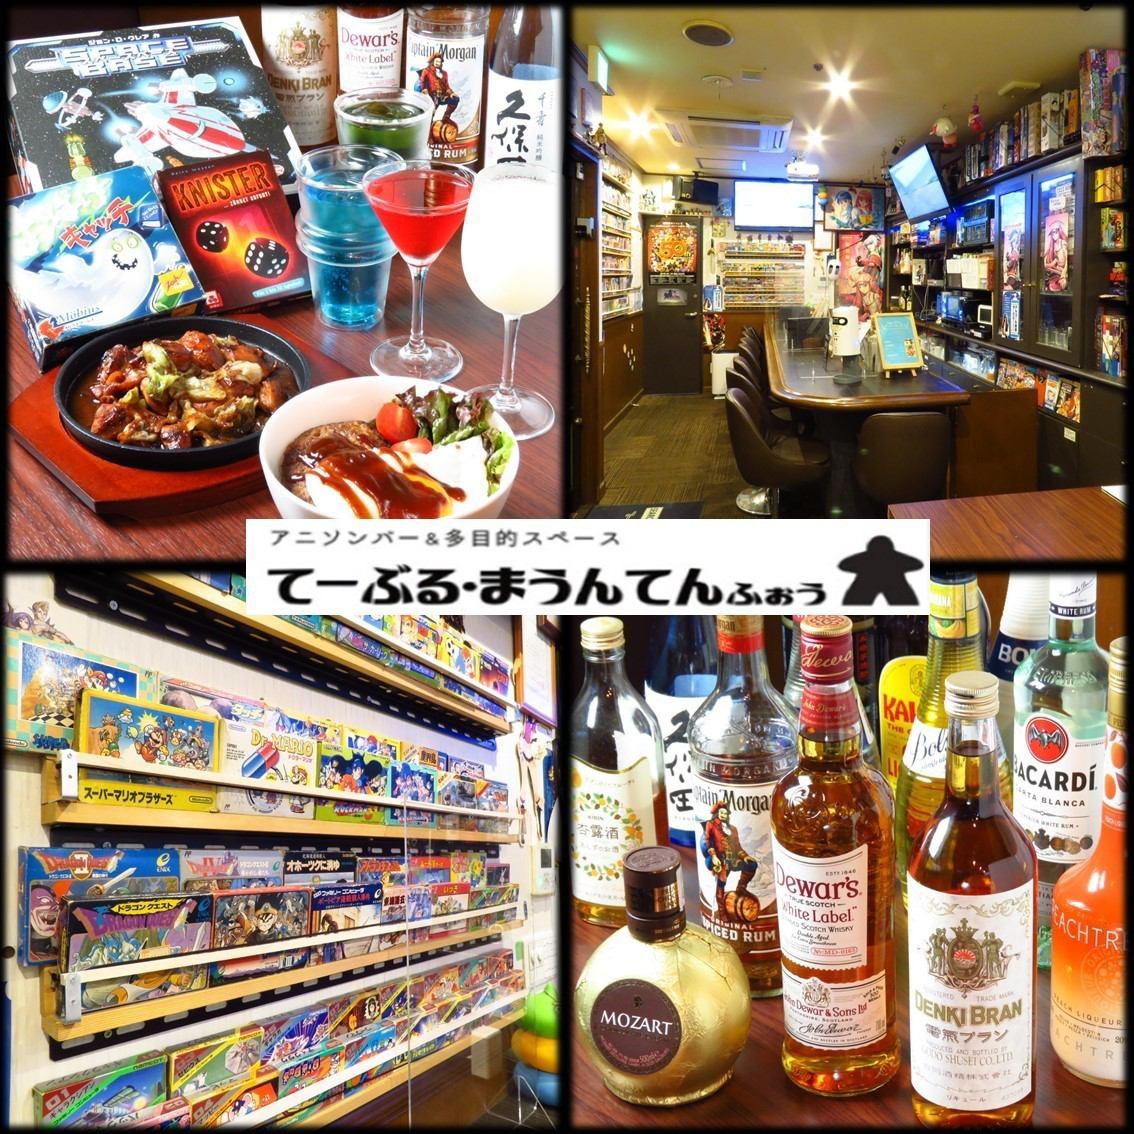 4 minutes walk from Imaike station! Everyone can enjoy board games and karaoke ♪